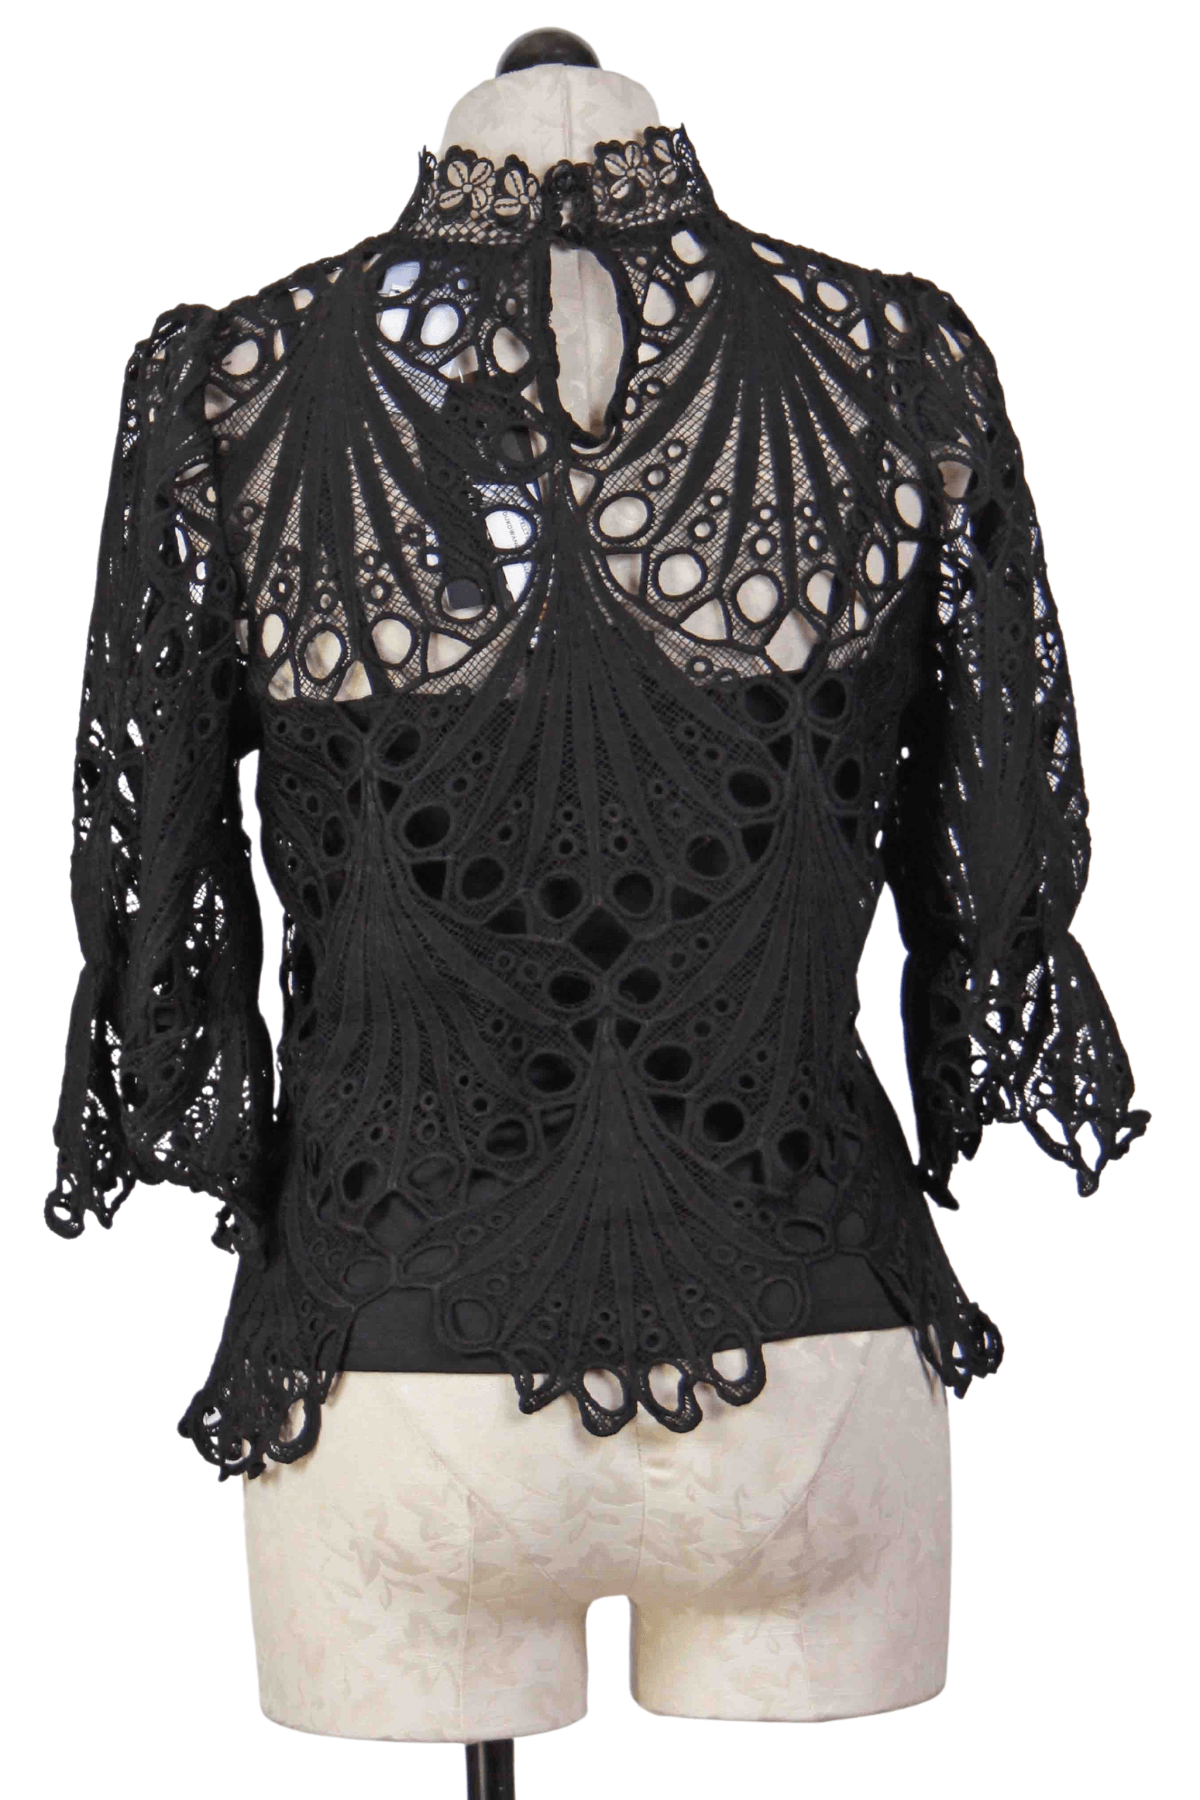 back view of Black Short Sleeve Lace Top by Frank Lyman with cami